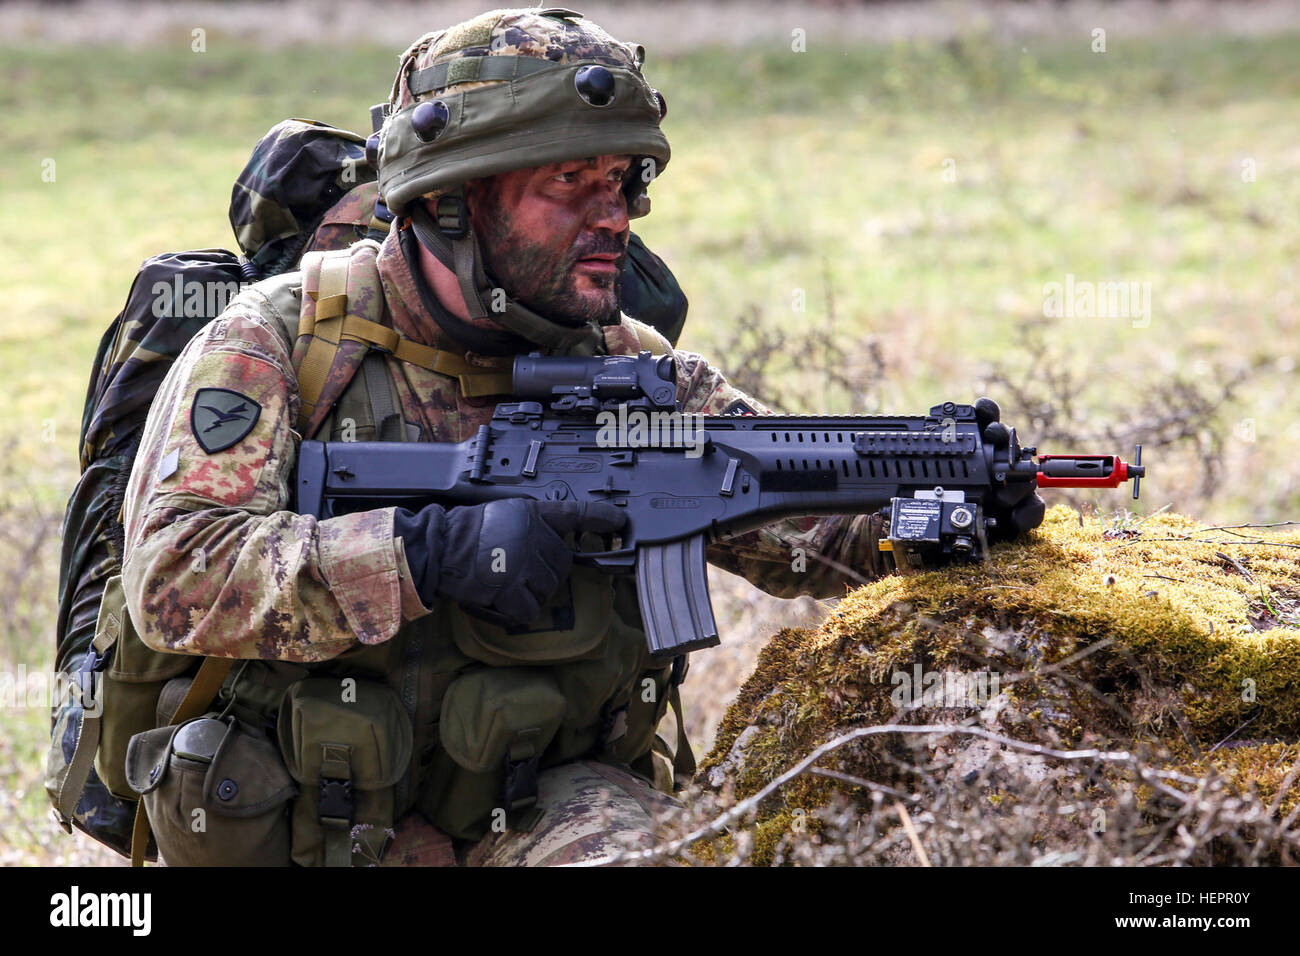 An Italian soldier of 5th Regiment, 187th Parachute Regiment “Folgore” provides security during a movement to contact scenario during exercise Saber Junction 16 at the U.S. Army’s Joint Multinational Readiness Center (JMRC) in Hohenfels, Germany, April 13, 2016. Saber Junction 16 is the U.S. Army Europe’s 173rd Airborne Brigade’s combat training center certification exercise, taking place at the JMRC in Hohenfels, Germany, Mar. 31-Apr. 24, 2016.  The exercise is designed to evaluate the readiness of the Army’s Europe-based combat brigades to conduct unified land operations and promote interope Stock Photo